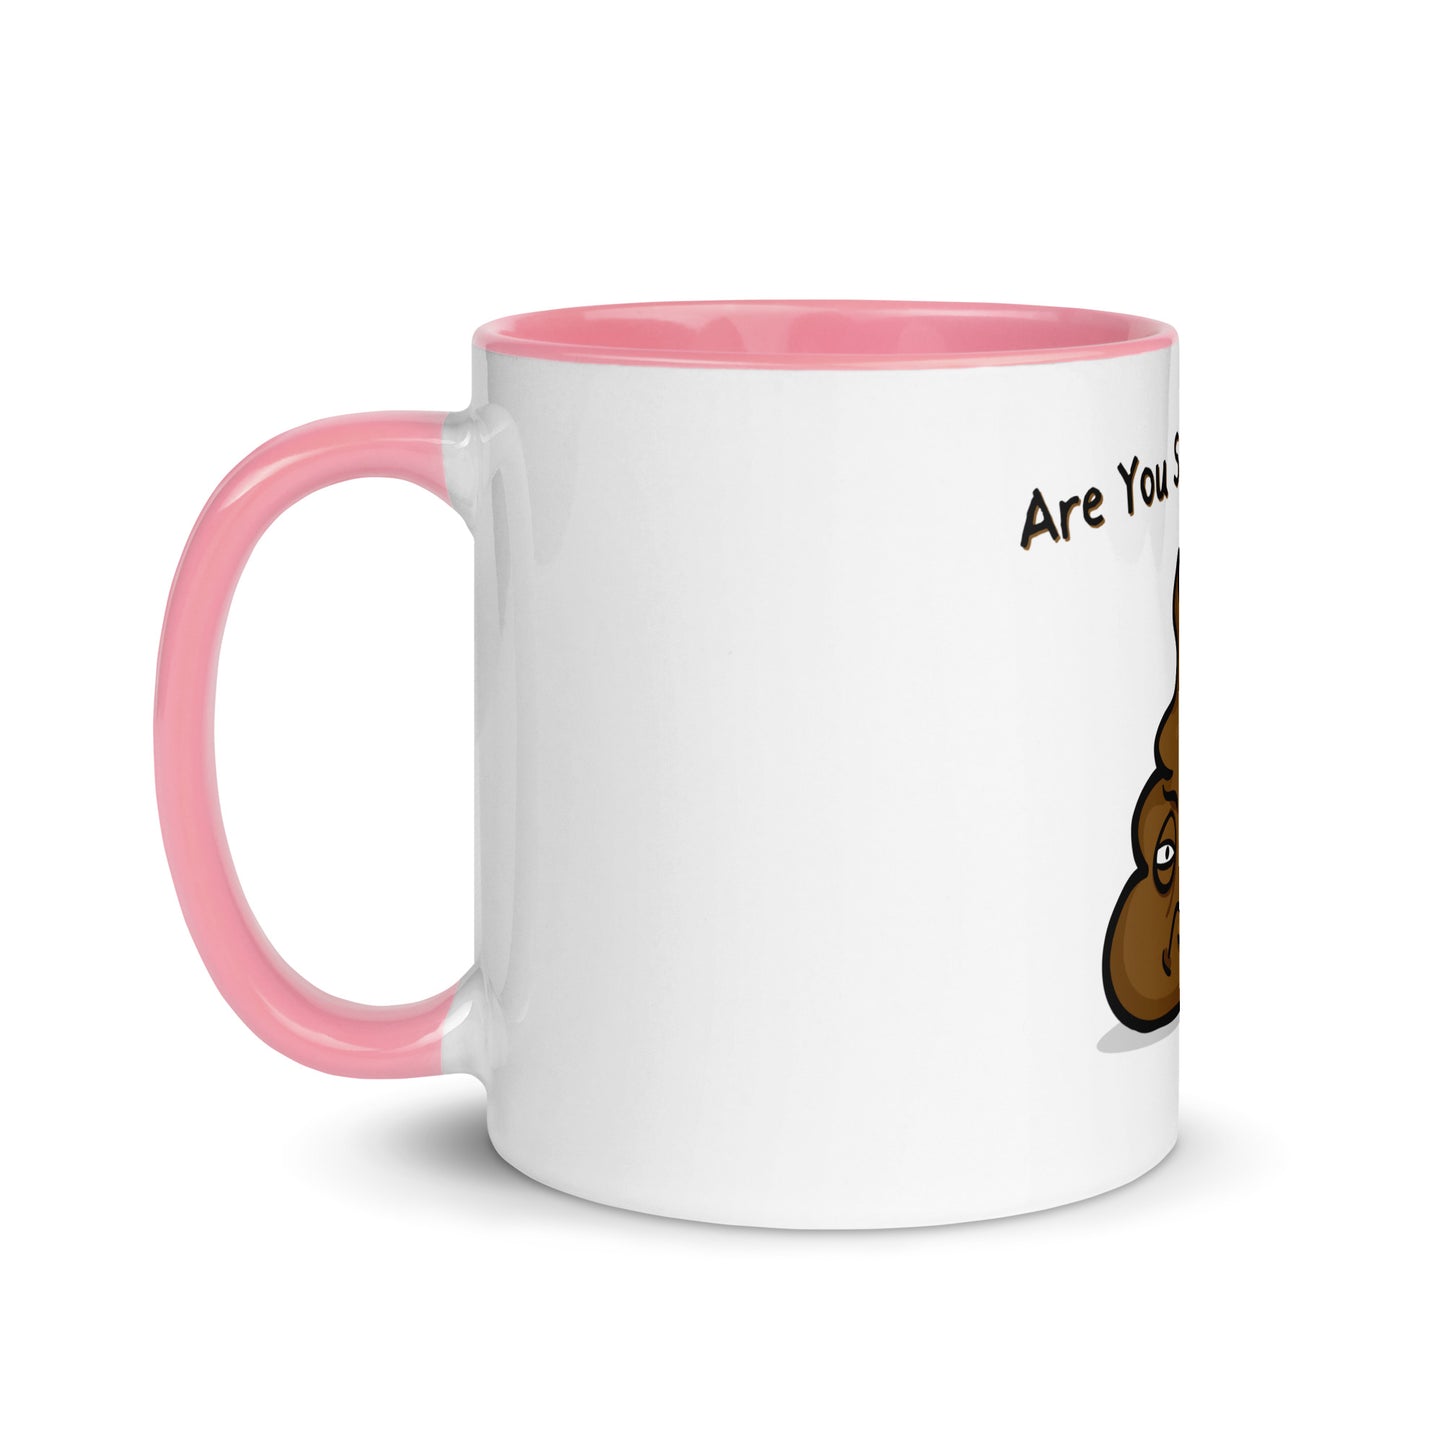 "Are You Shittin' Me?" Coffee Mug - Weave Got Gifts - Unique Gifts You Won’t Find Anywhere Else!